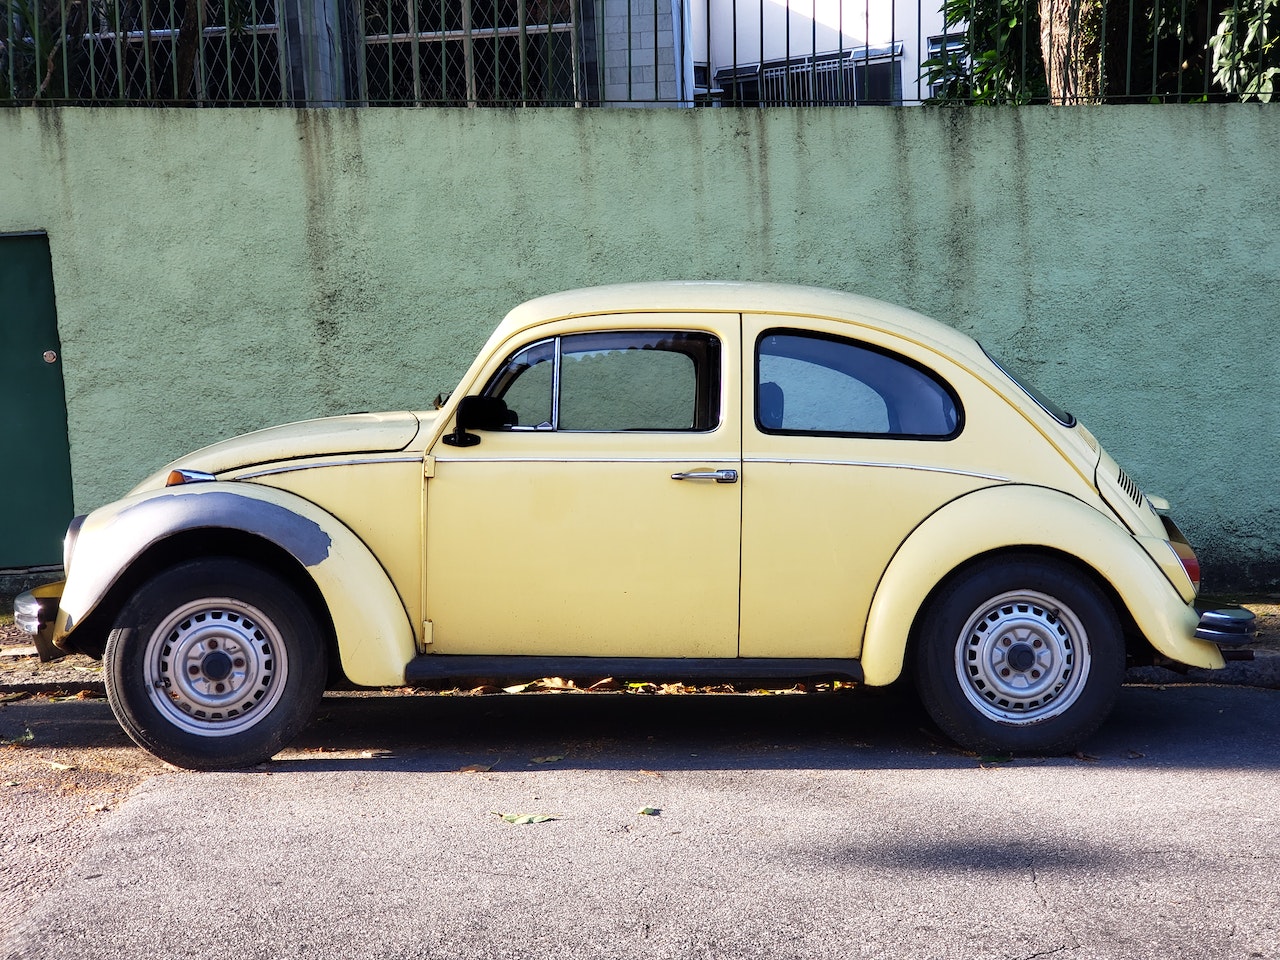 Yellow Volkswagen Beetle Parked on Roadside | Goodwill Car Donations